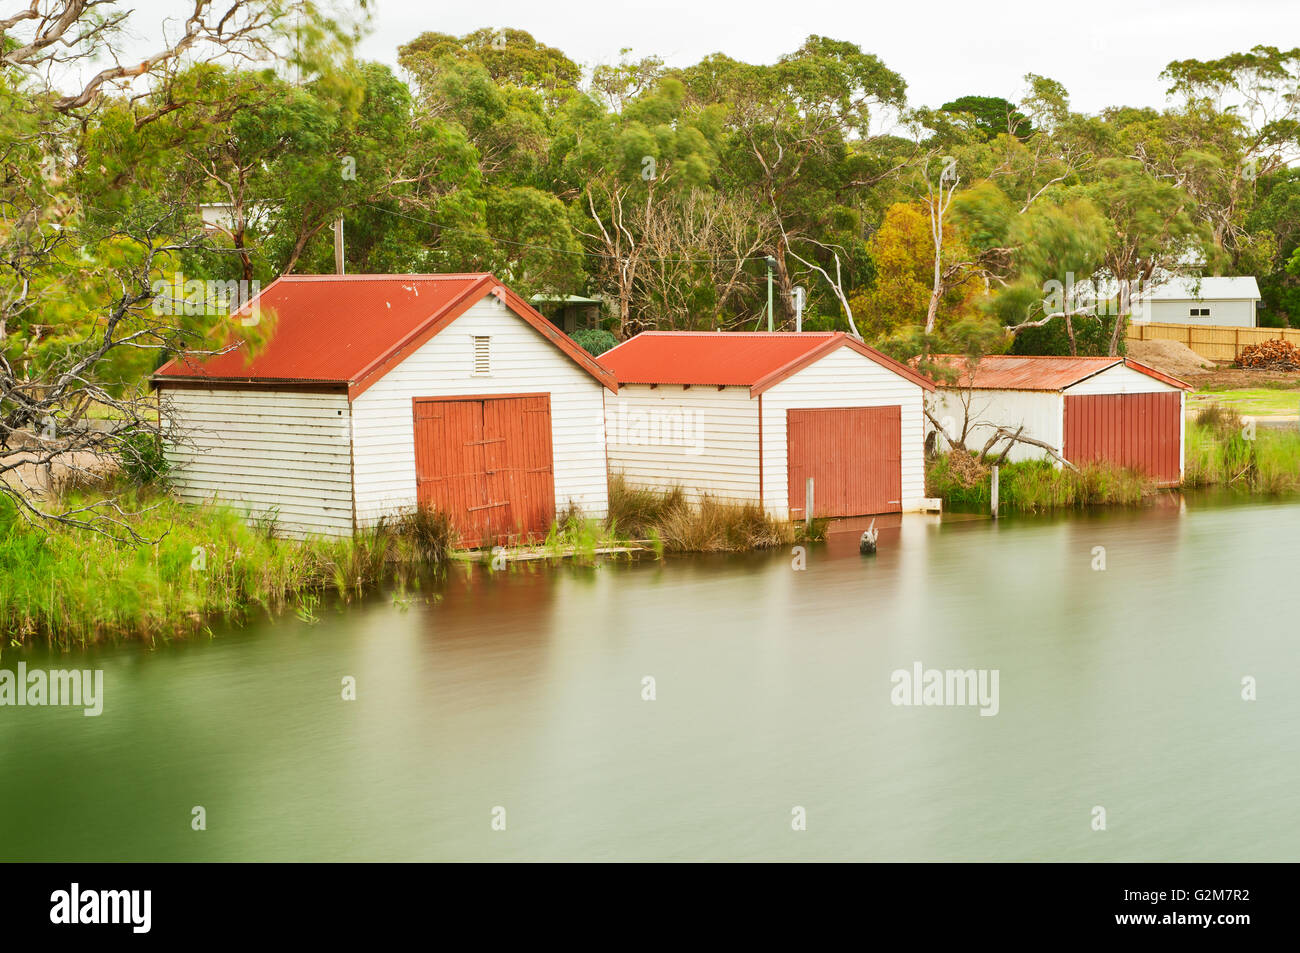 A Boatsheds Anglesea Fiume sulla Great Ocean Road. Foto Stock